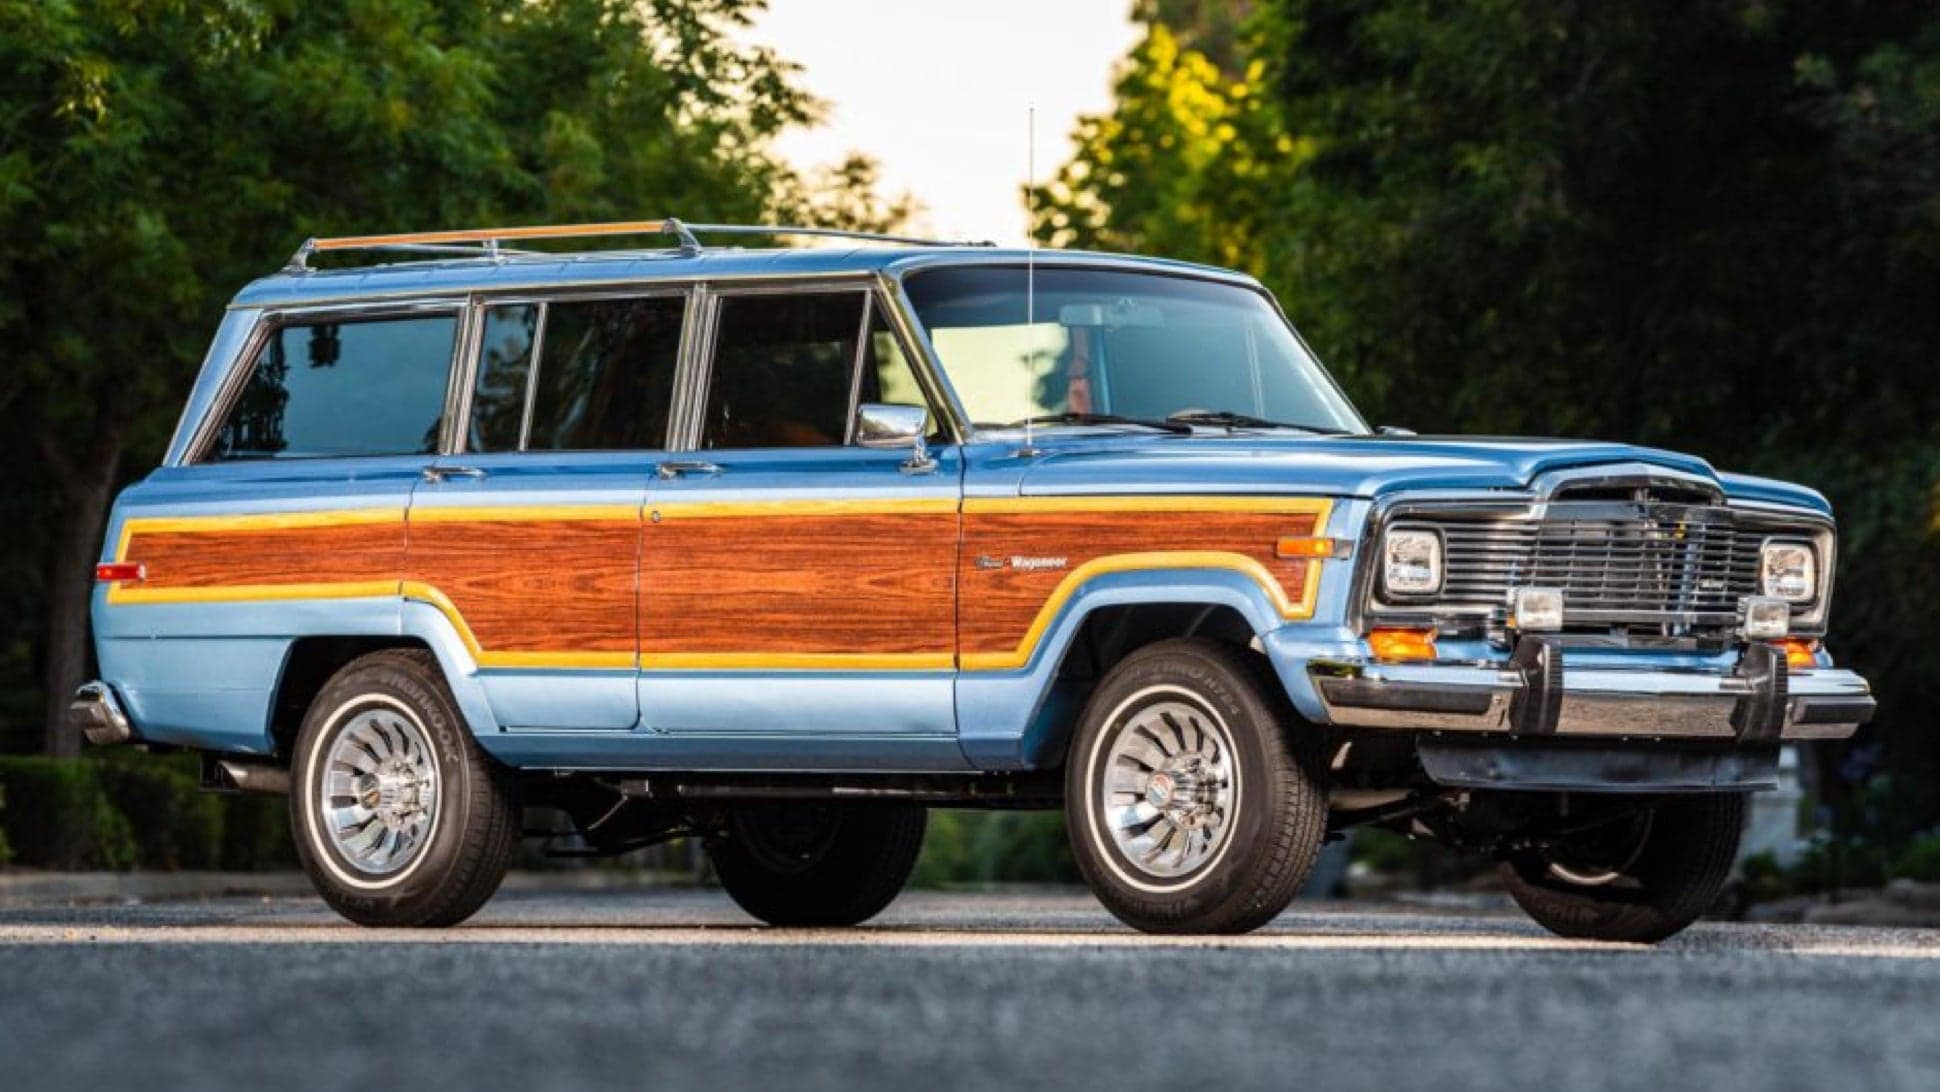 1984 Jeep Grand Wagoneer Powered by LS1 V8 Is the Perfect Mix of Classy and Rowdy